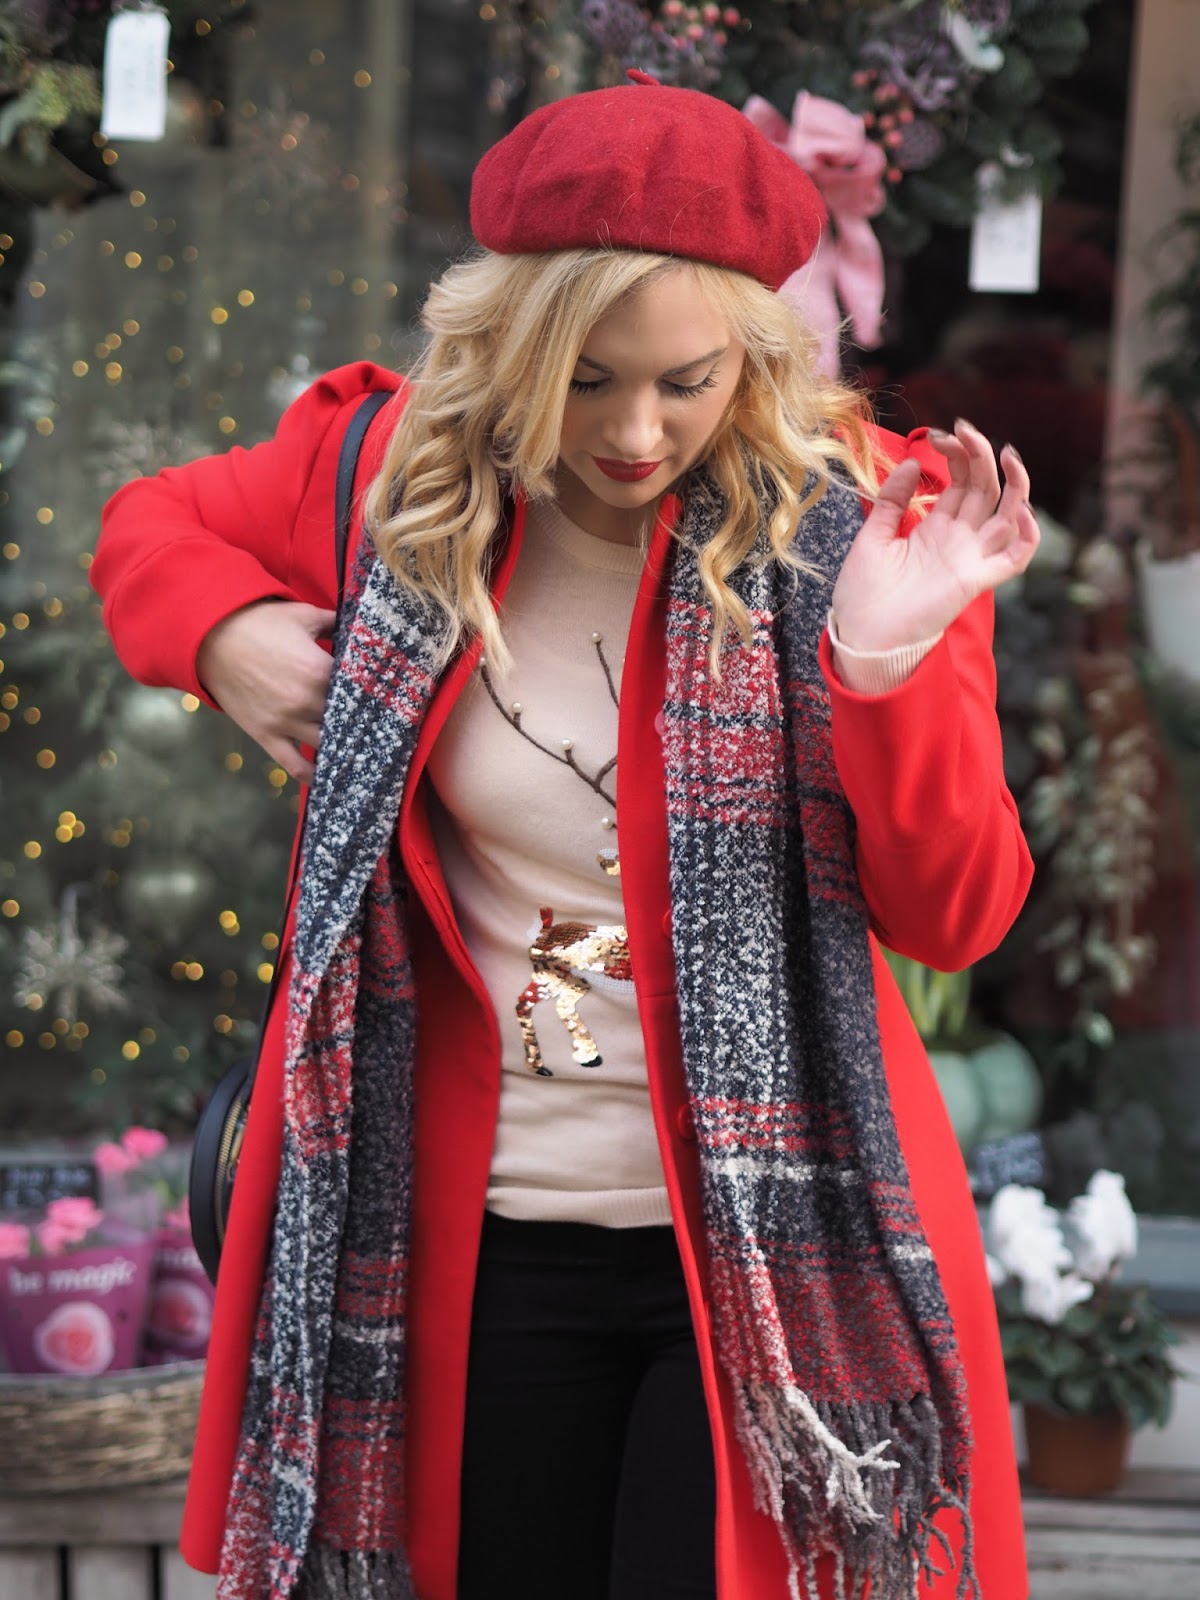 Santa Claus is Coming to Town, Katie Kirk Loves, UK Blogger, Fashion Blogger, Fashion Influencer, Style Blogger, Style Influencer, Outfit Ideas, Outfit Post, Festive Outfits, Christmas Outfit Ideas, Christmas Eve Outfit, Oasis Fashion, Oasis Sale, Christmas Jumper, The Perfect Red Coat, Christmas Red Coat, Happy Christmas Eve